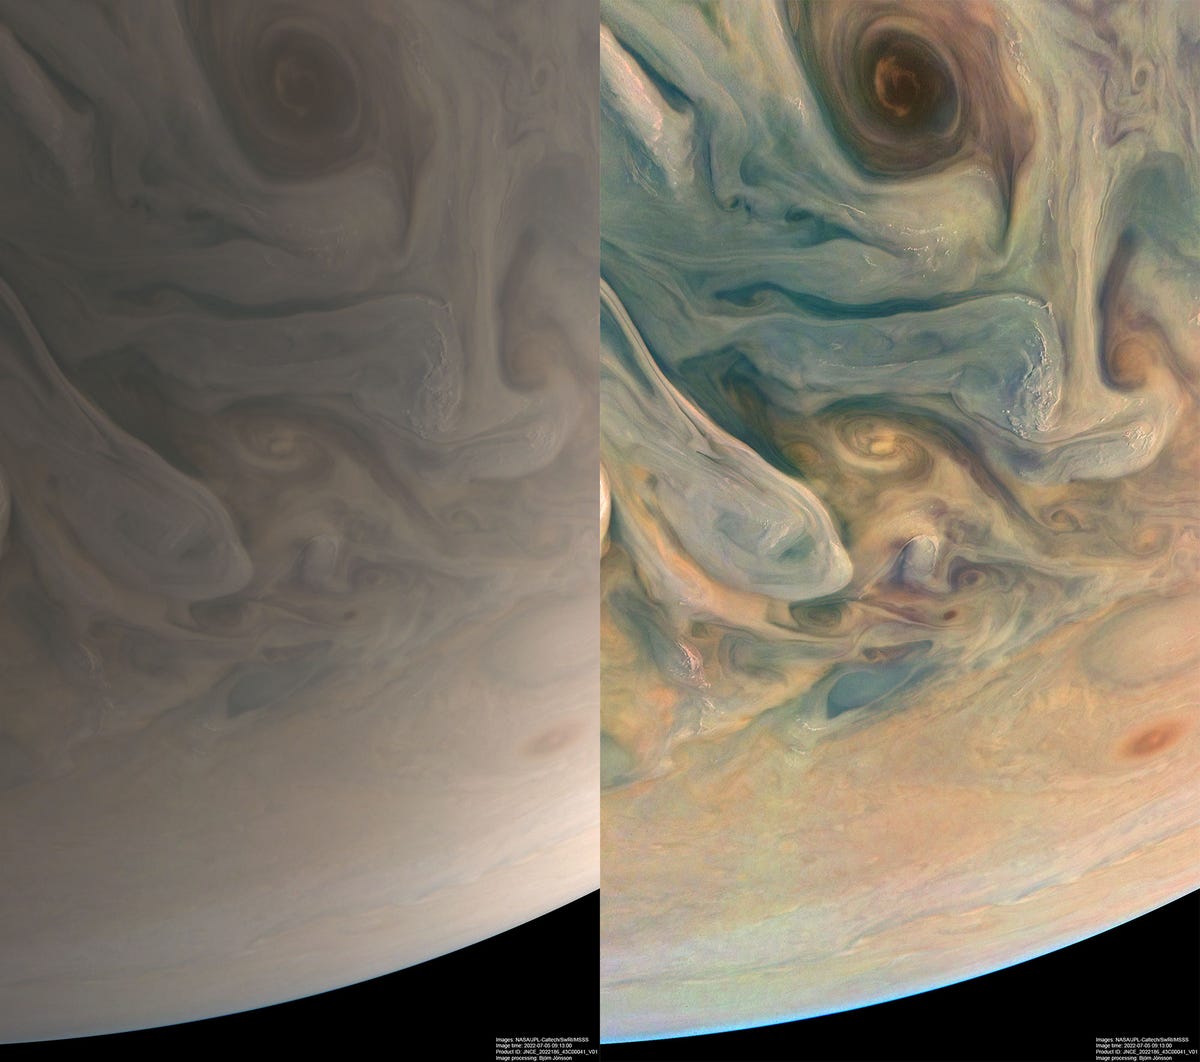 On the left is a soft beige version of Jupiter.  On the right is the same image, except for the shades of blue, orange and yellow.